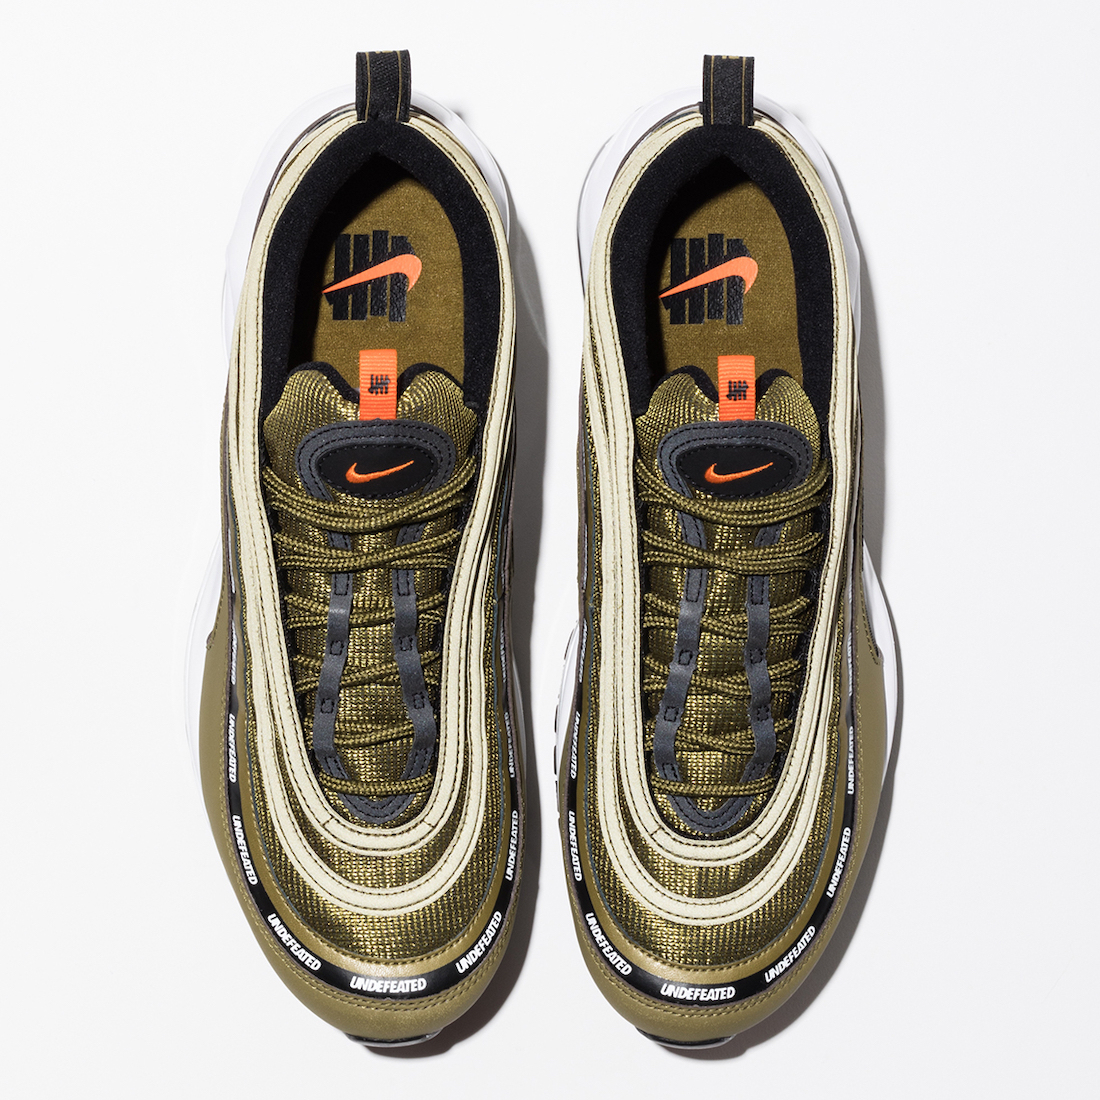 Undefeated Nike Air Max 97 2020 Release Date 5